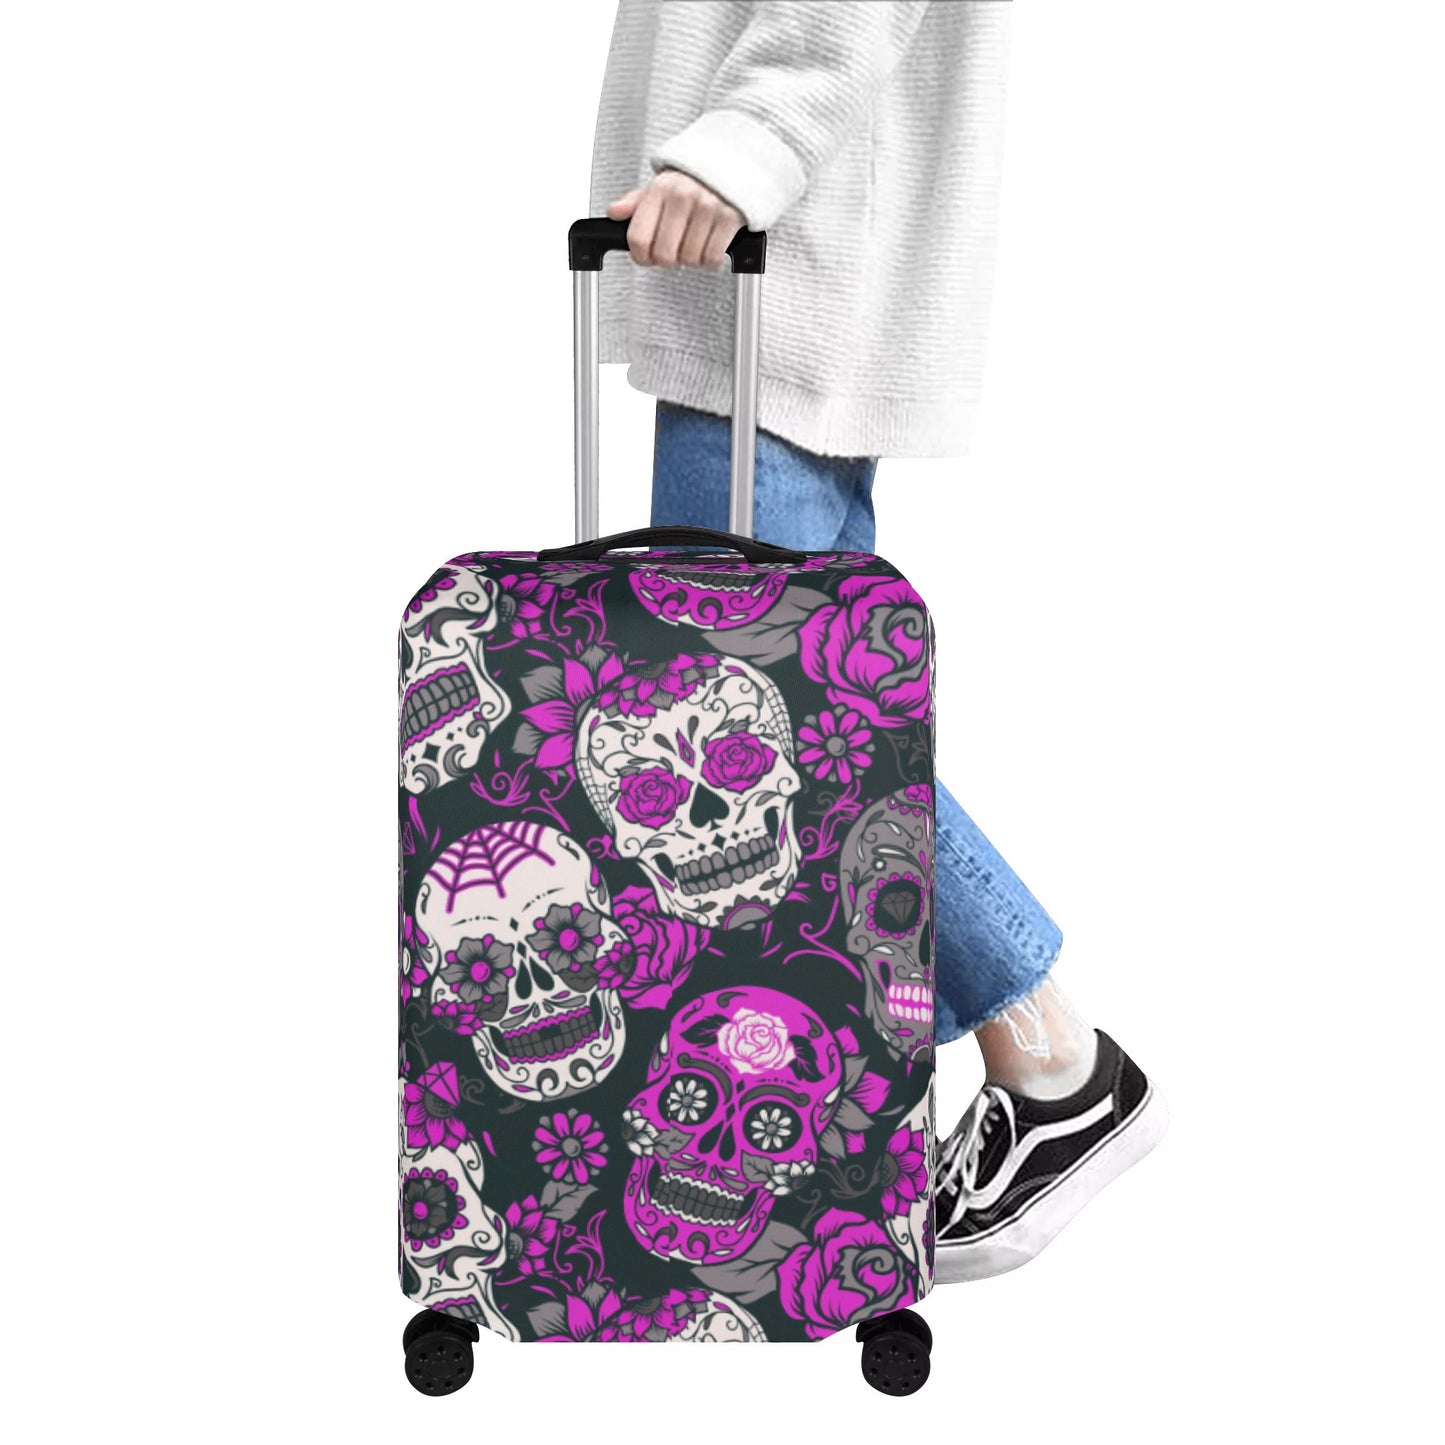 Day of the dead sugar skull gothic Polyester Luggage Cover